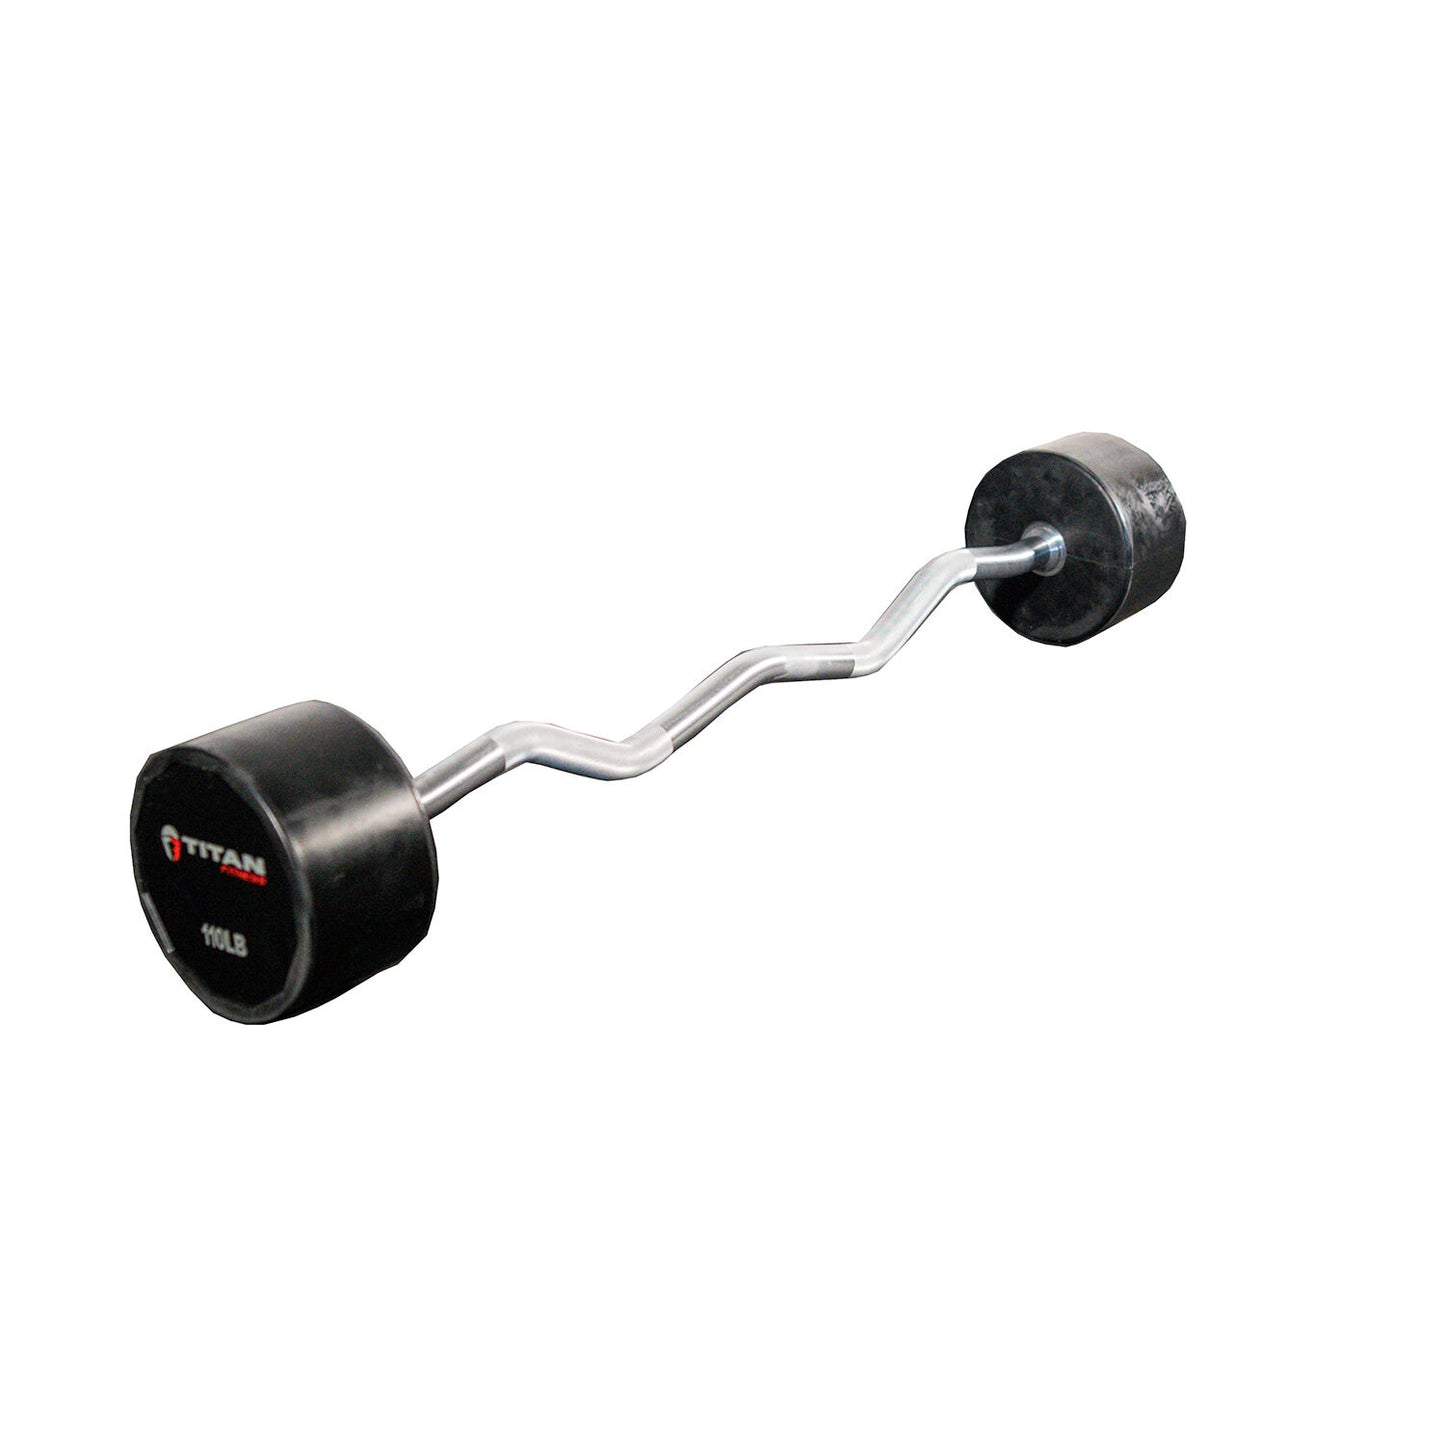 110 LB EZ Curl Rubber Fixed Barbell - view 1